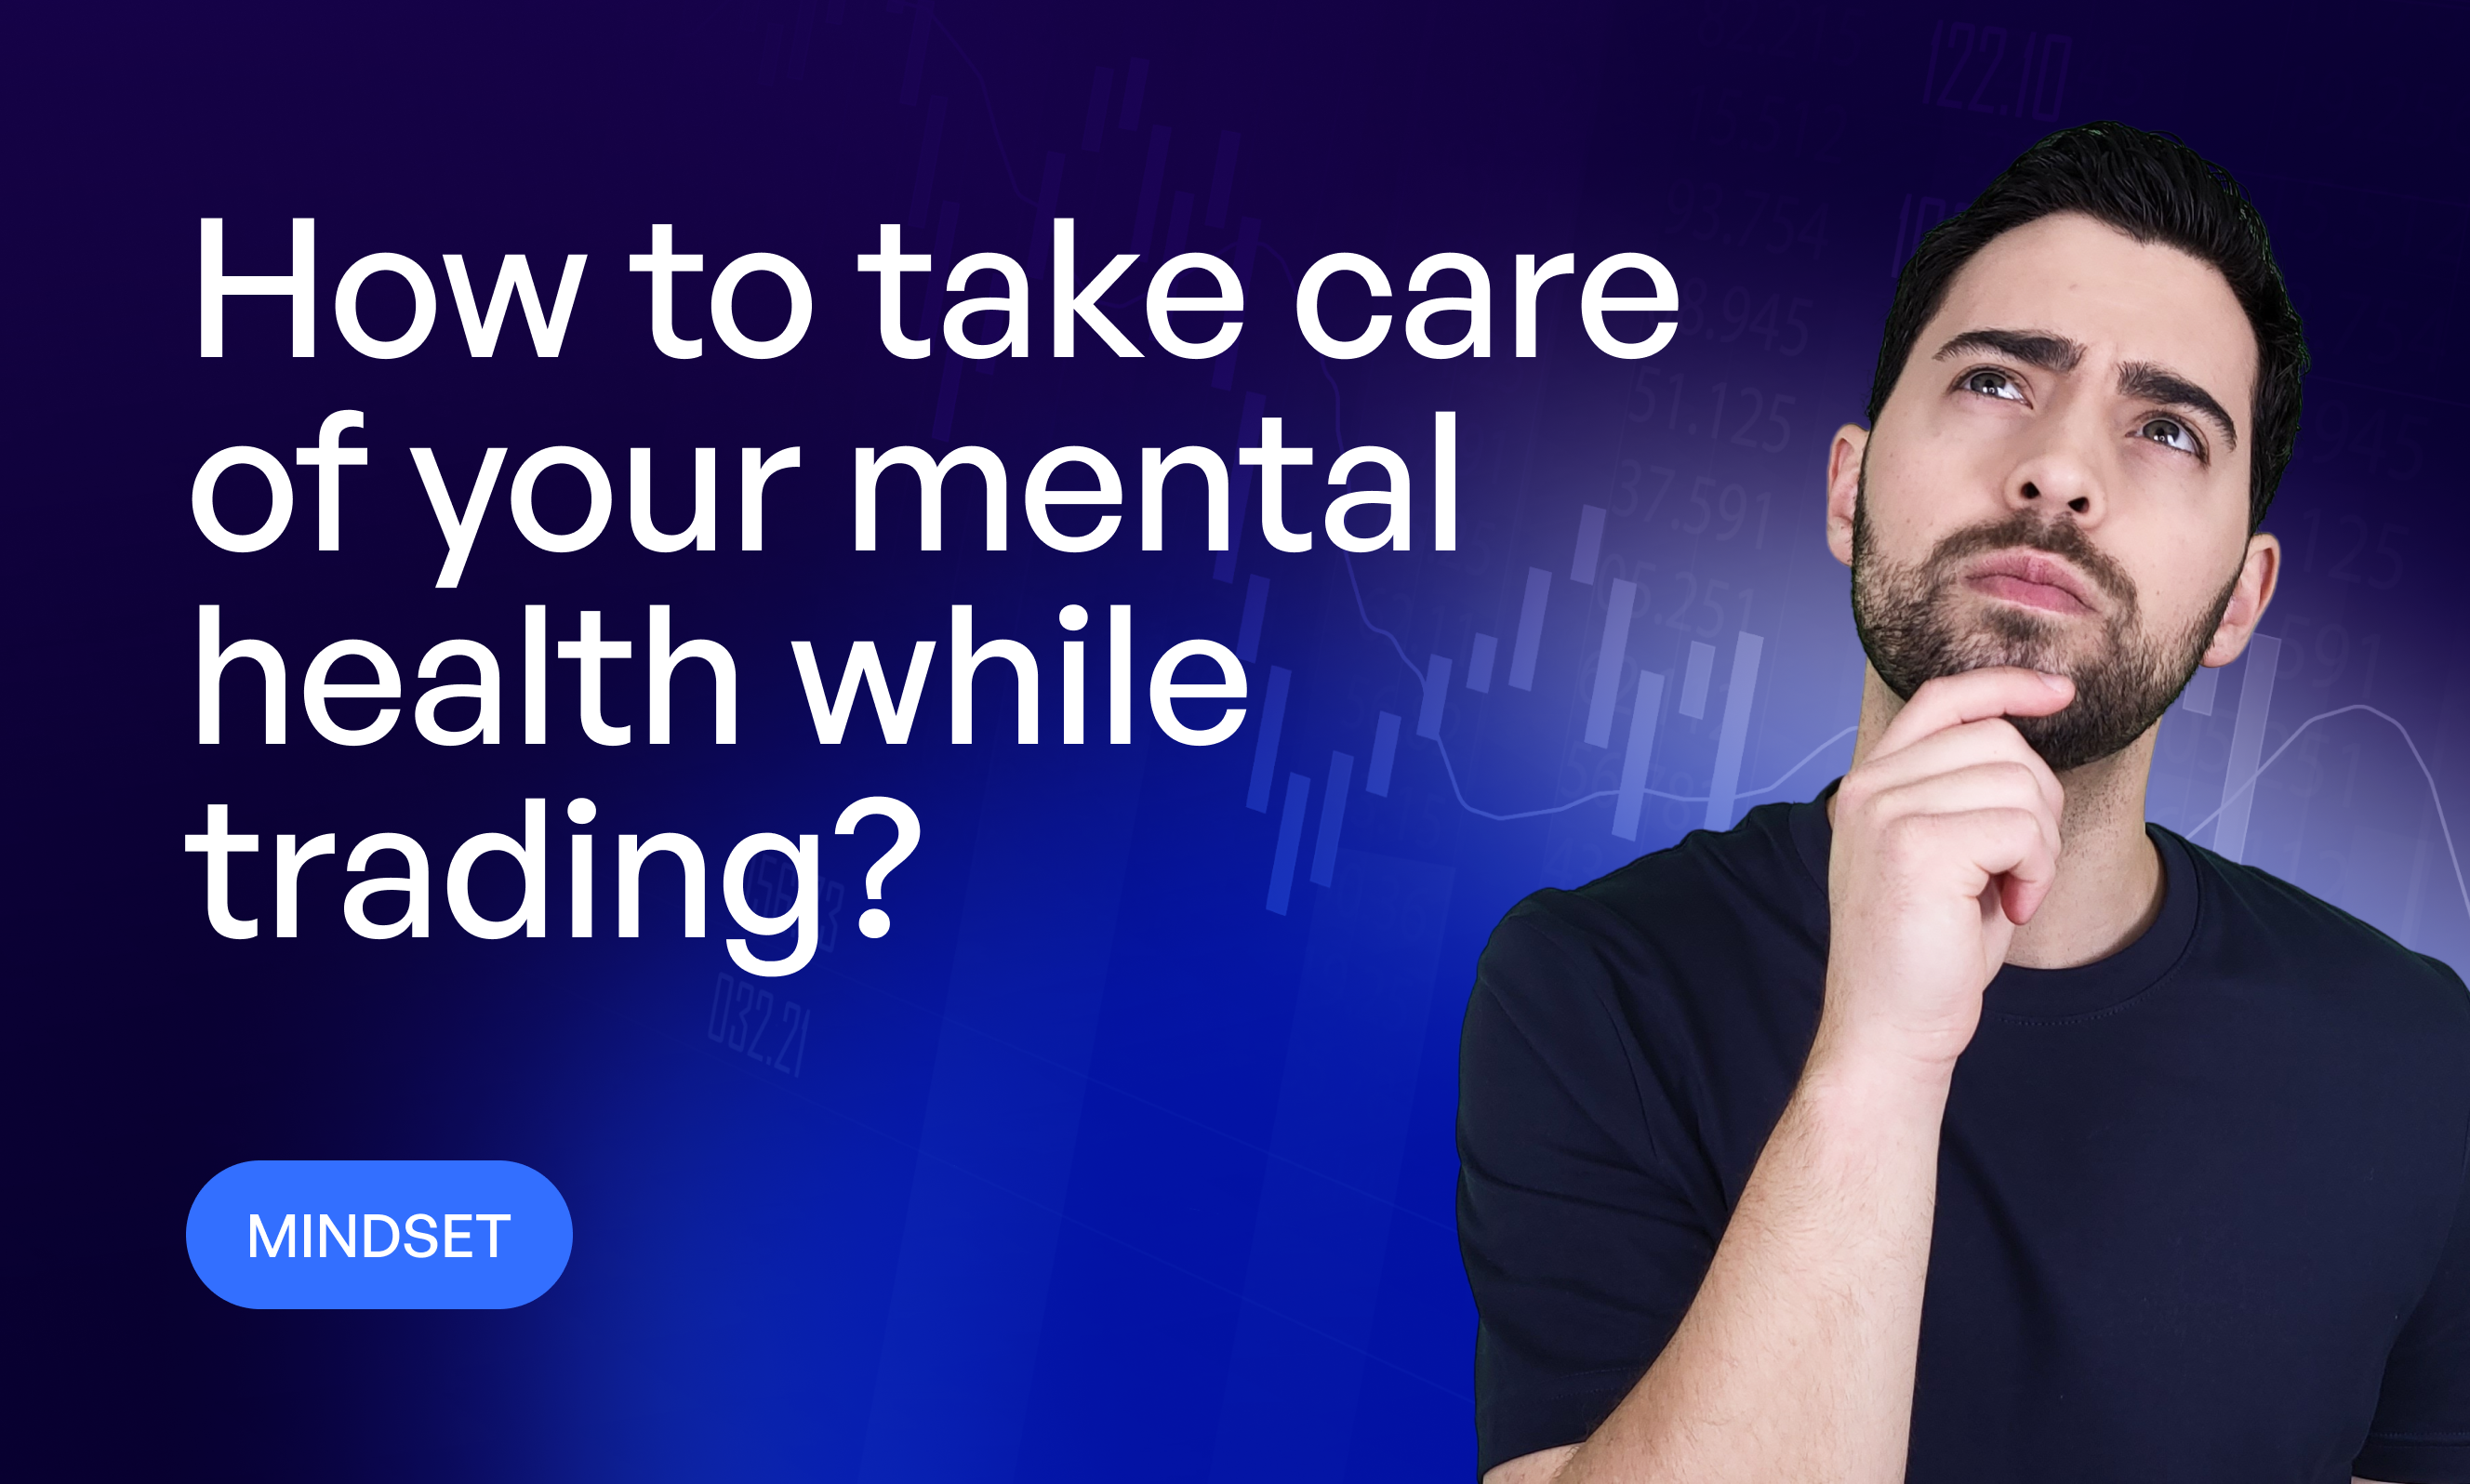 How To Take Care of Your Mental Health While Trading?